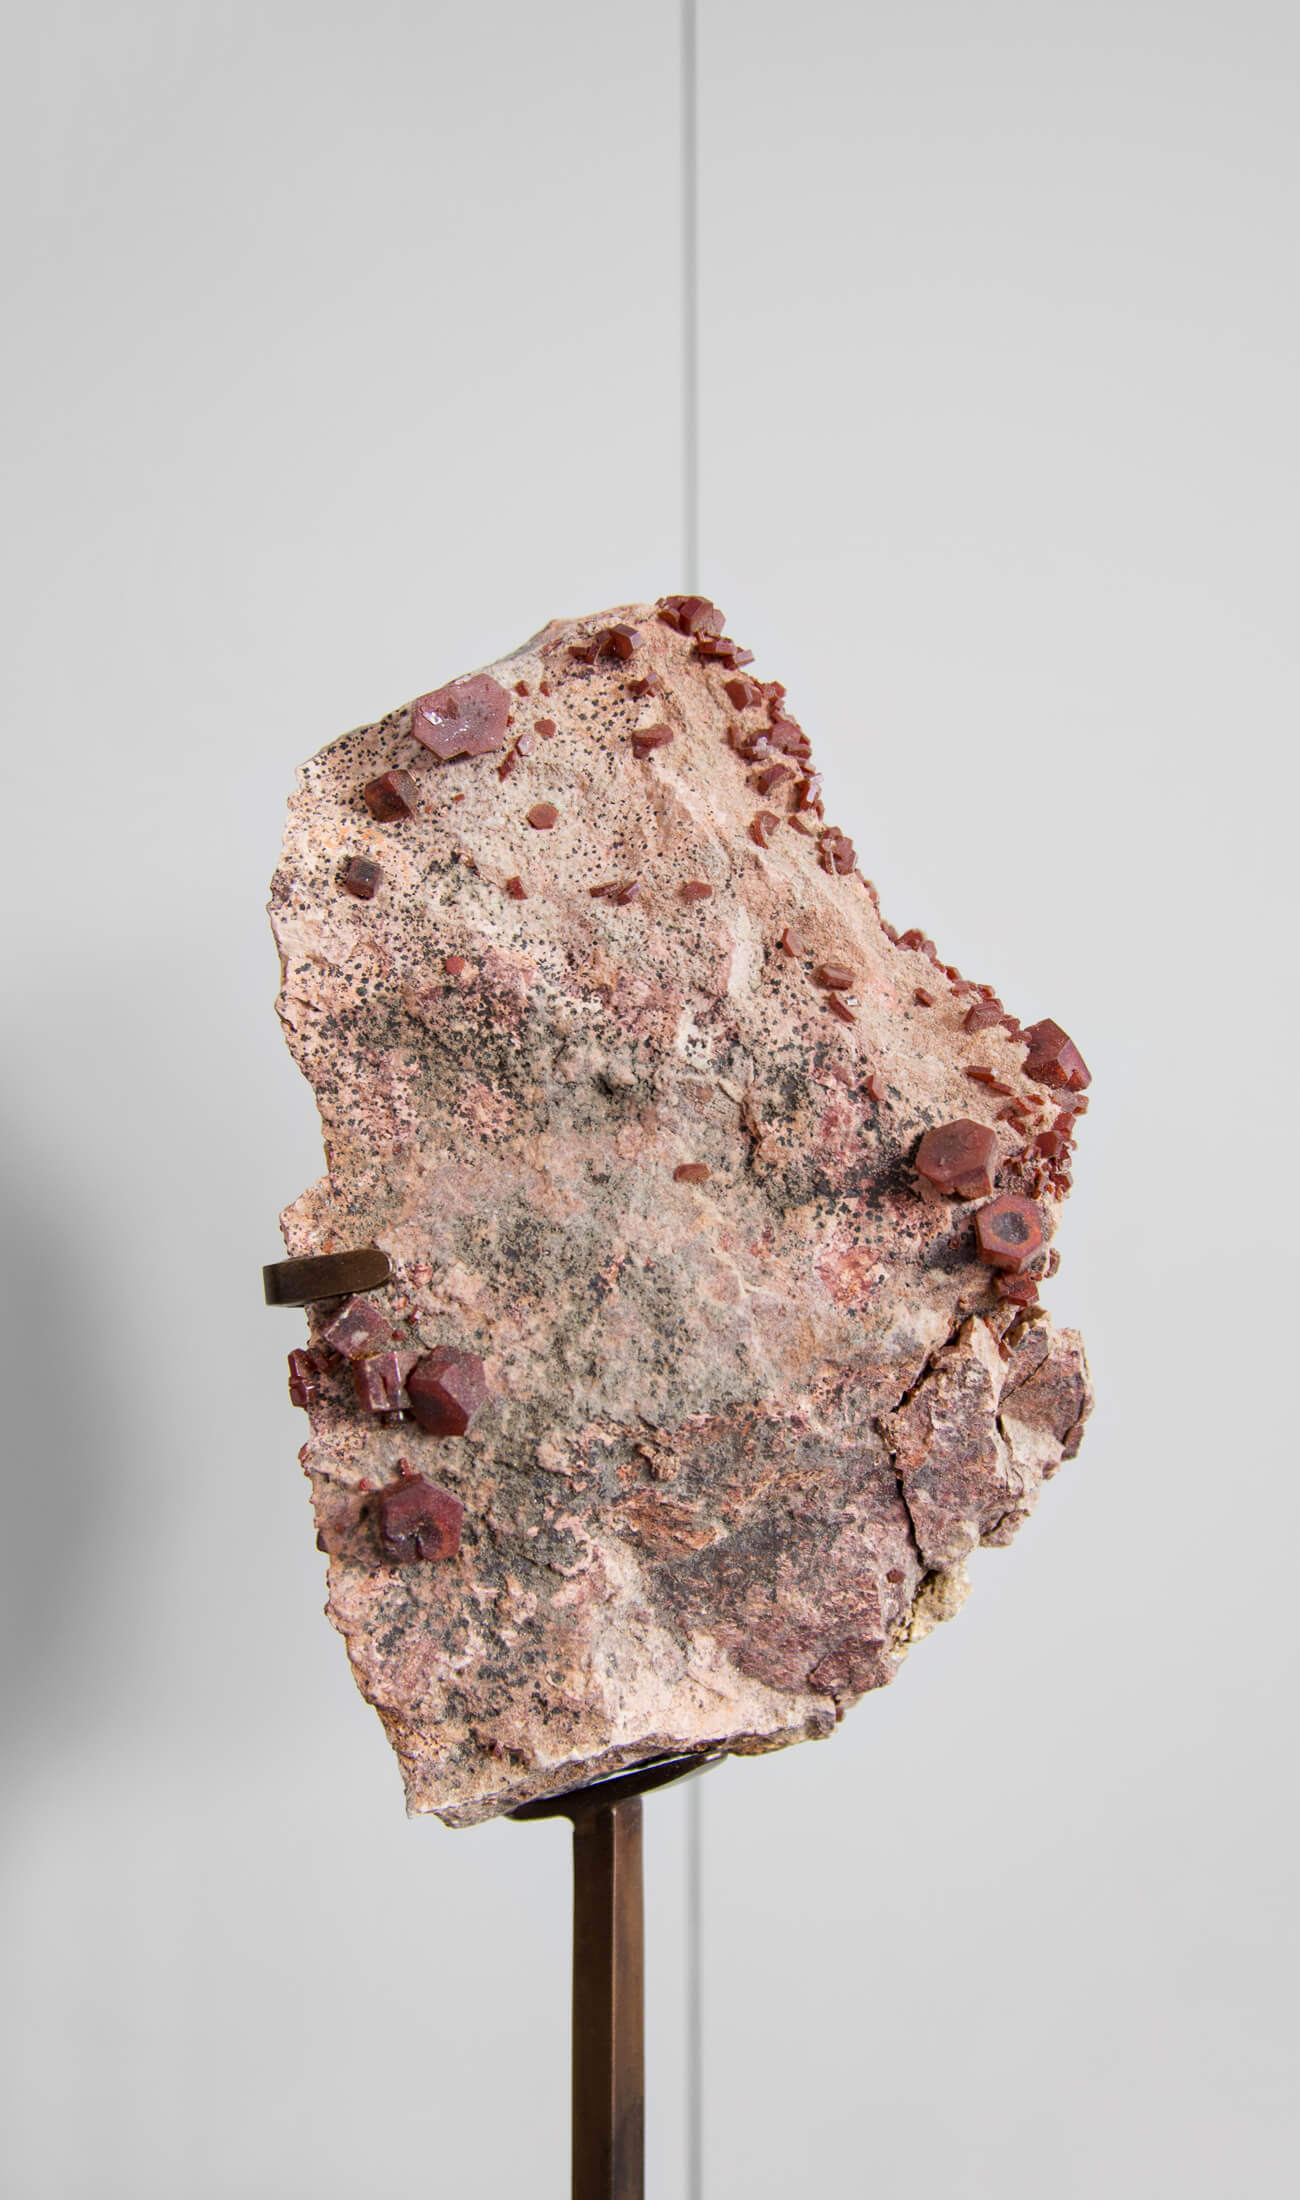 Beautiful red Vanadanite mineral gems in pink stone on a custom designed bronze Stand measuring 240mm